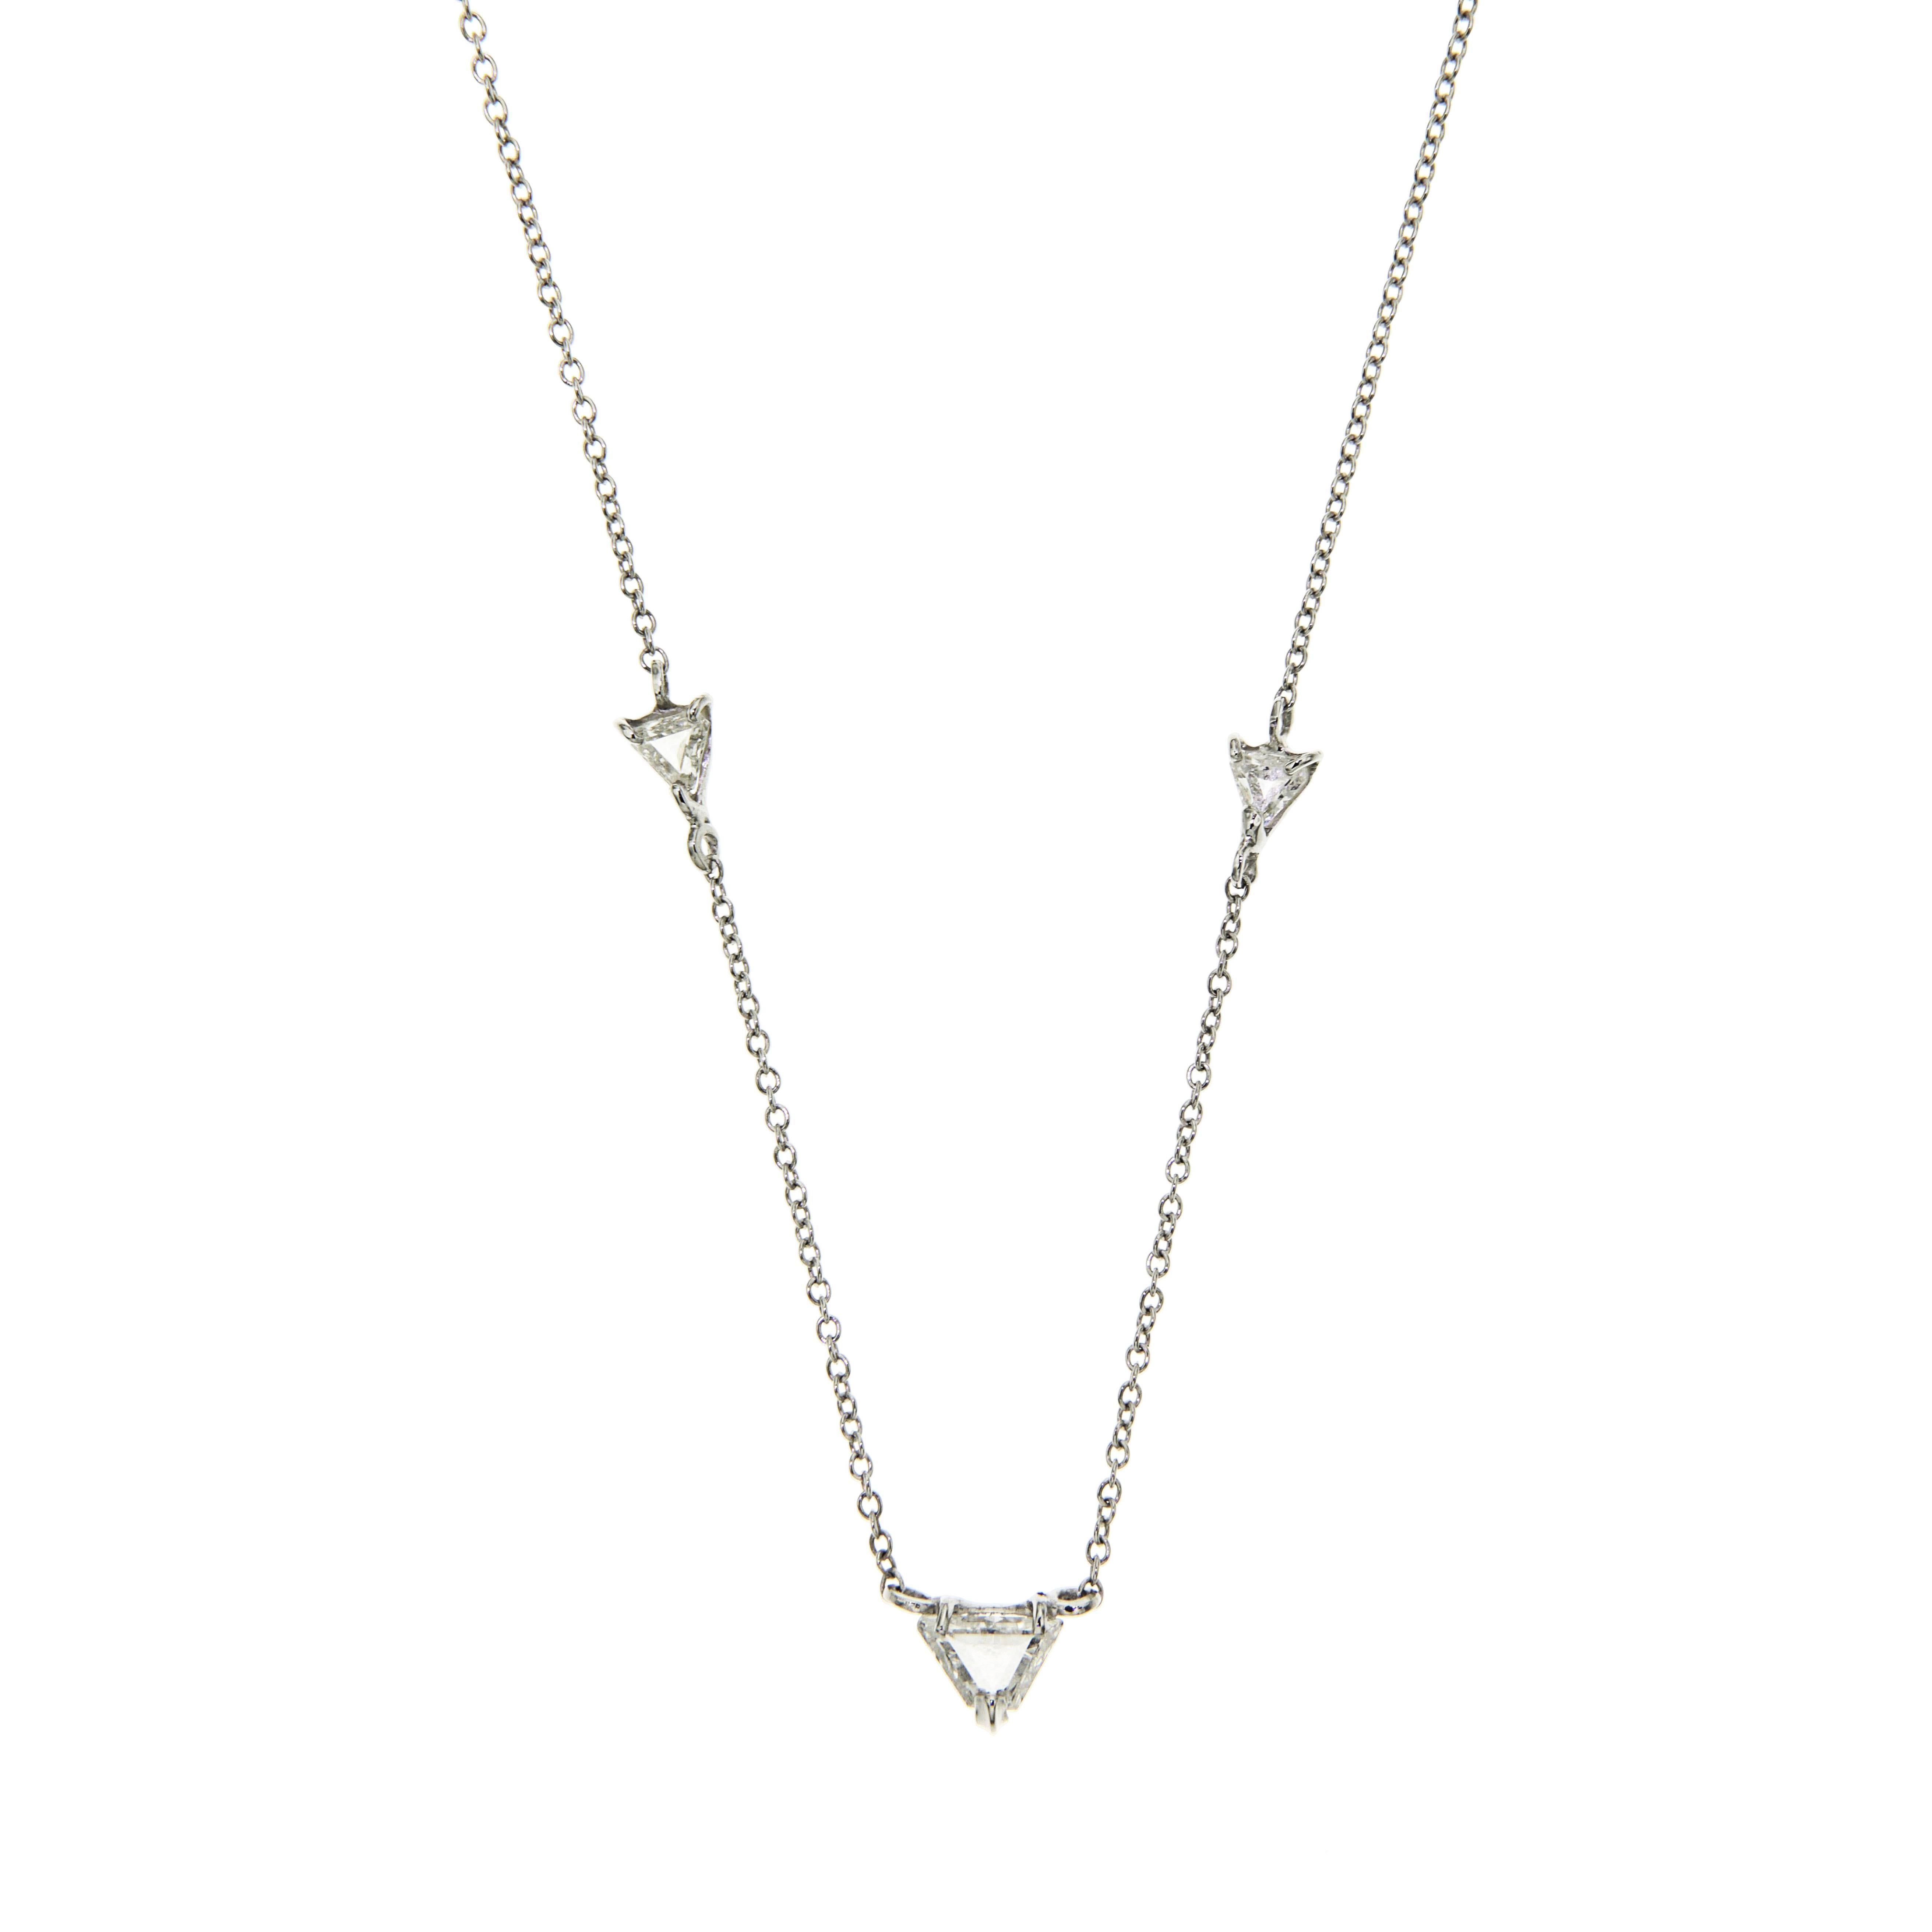 Diamonds White Gold Necklace Handcrafted in Italy by Botta Gioielli